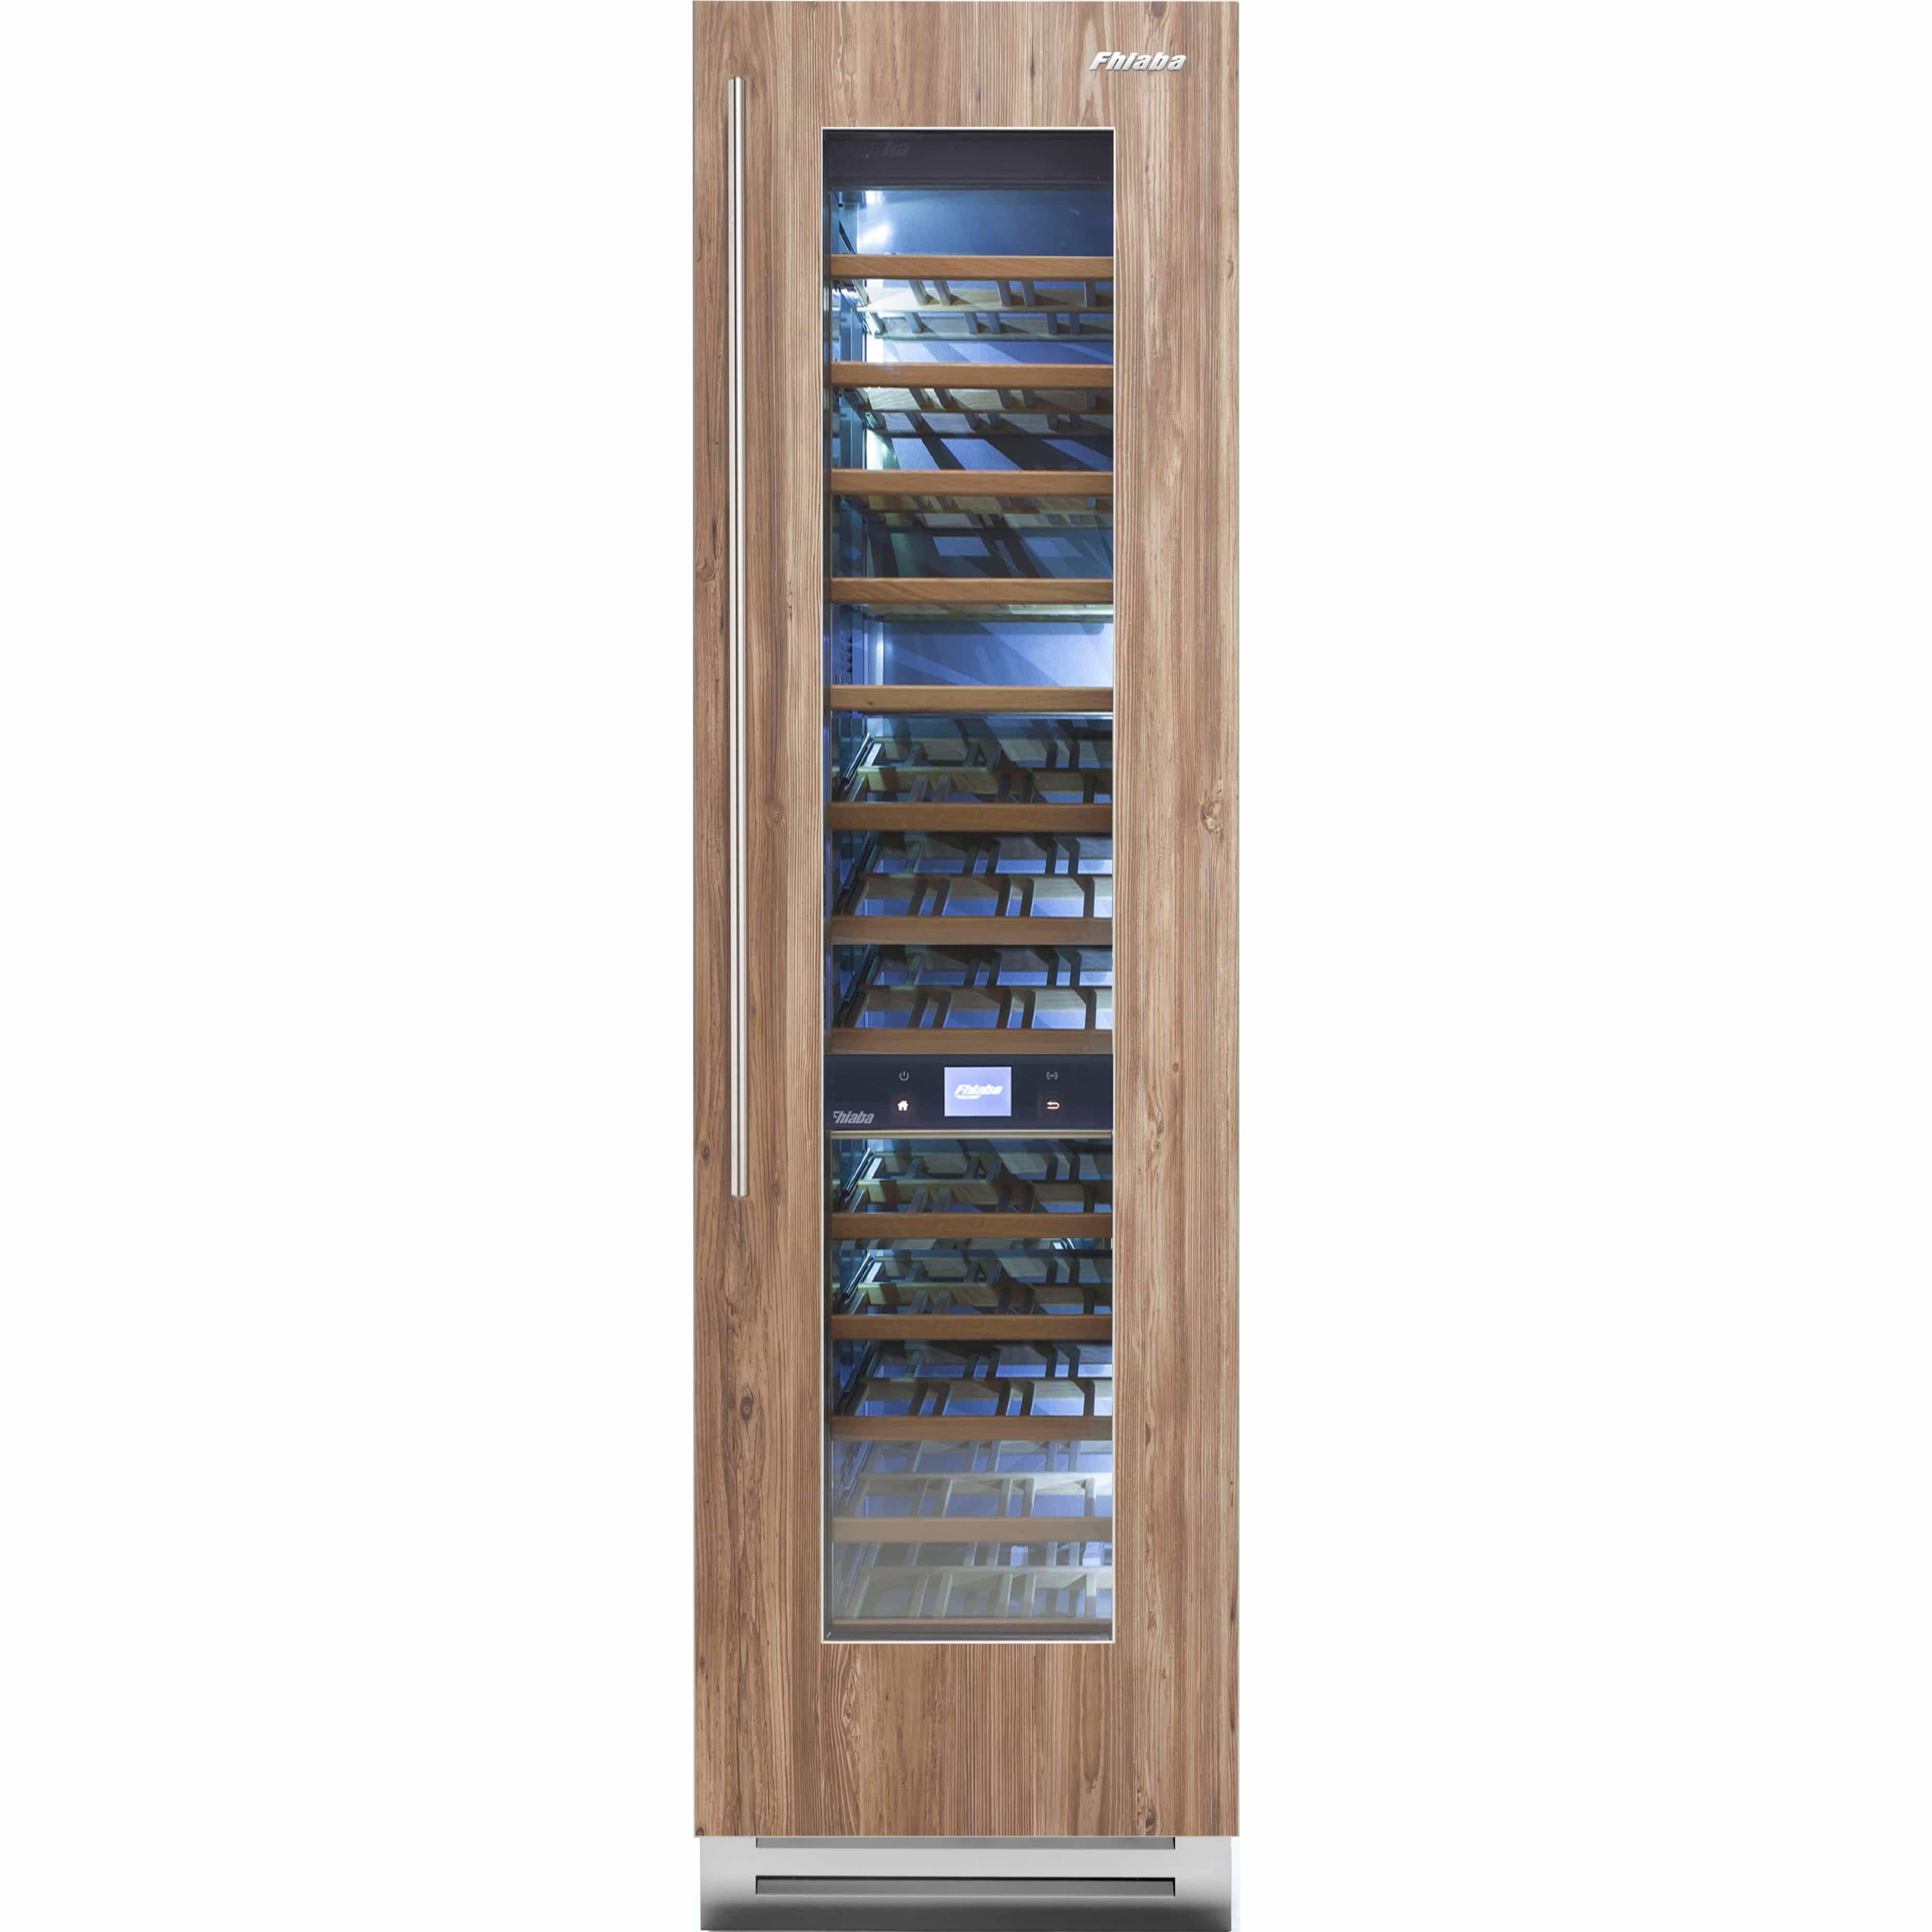 Fhiaba 78-Bottle Integrated Series Wine Cellar with Smart Touch TFT Display FI24WCC-RO2 Wine Storage FI24WCCRO2 Luxury Appliances Direct